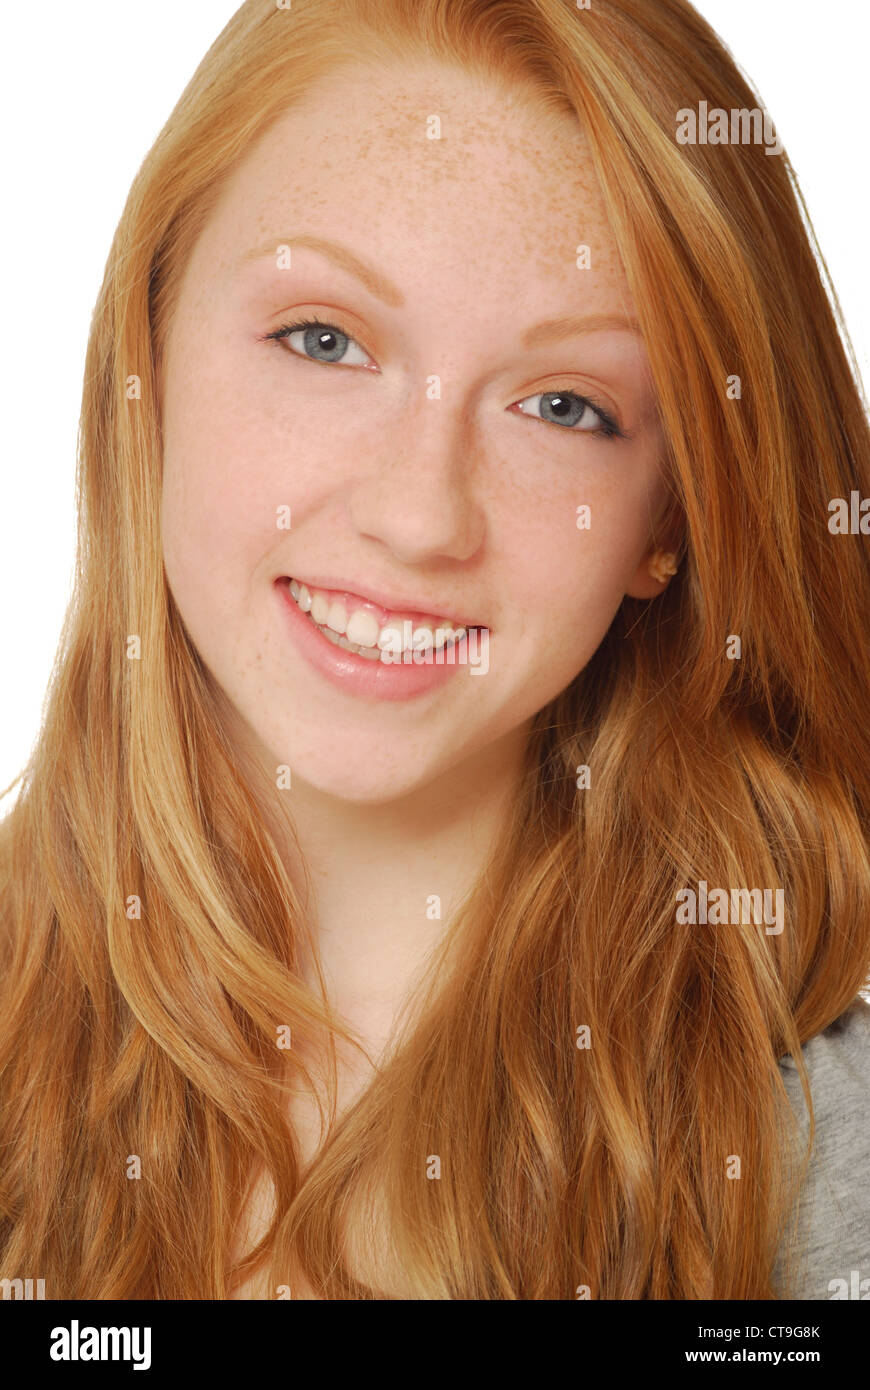 Cute teen girl redhead with freckles